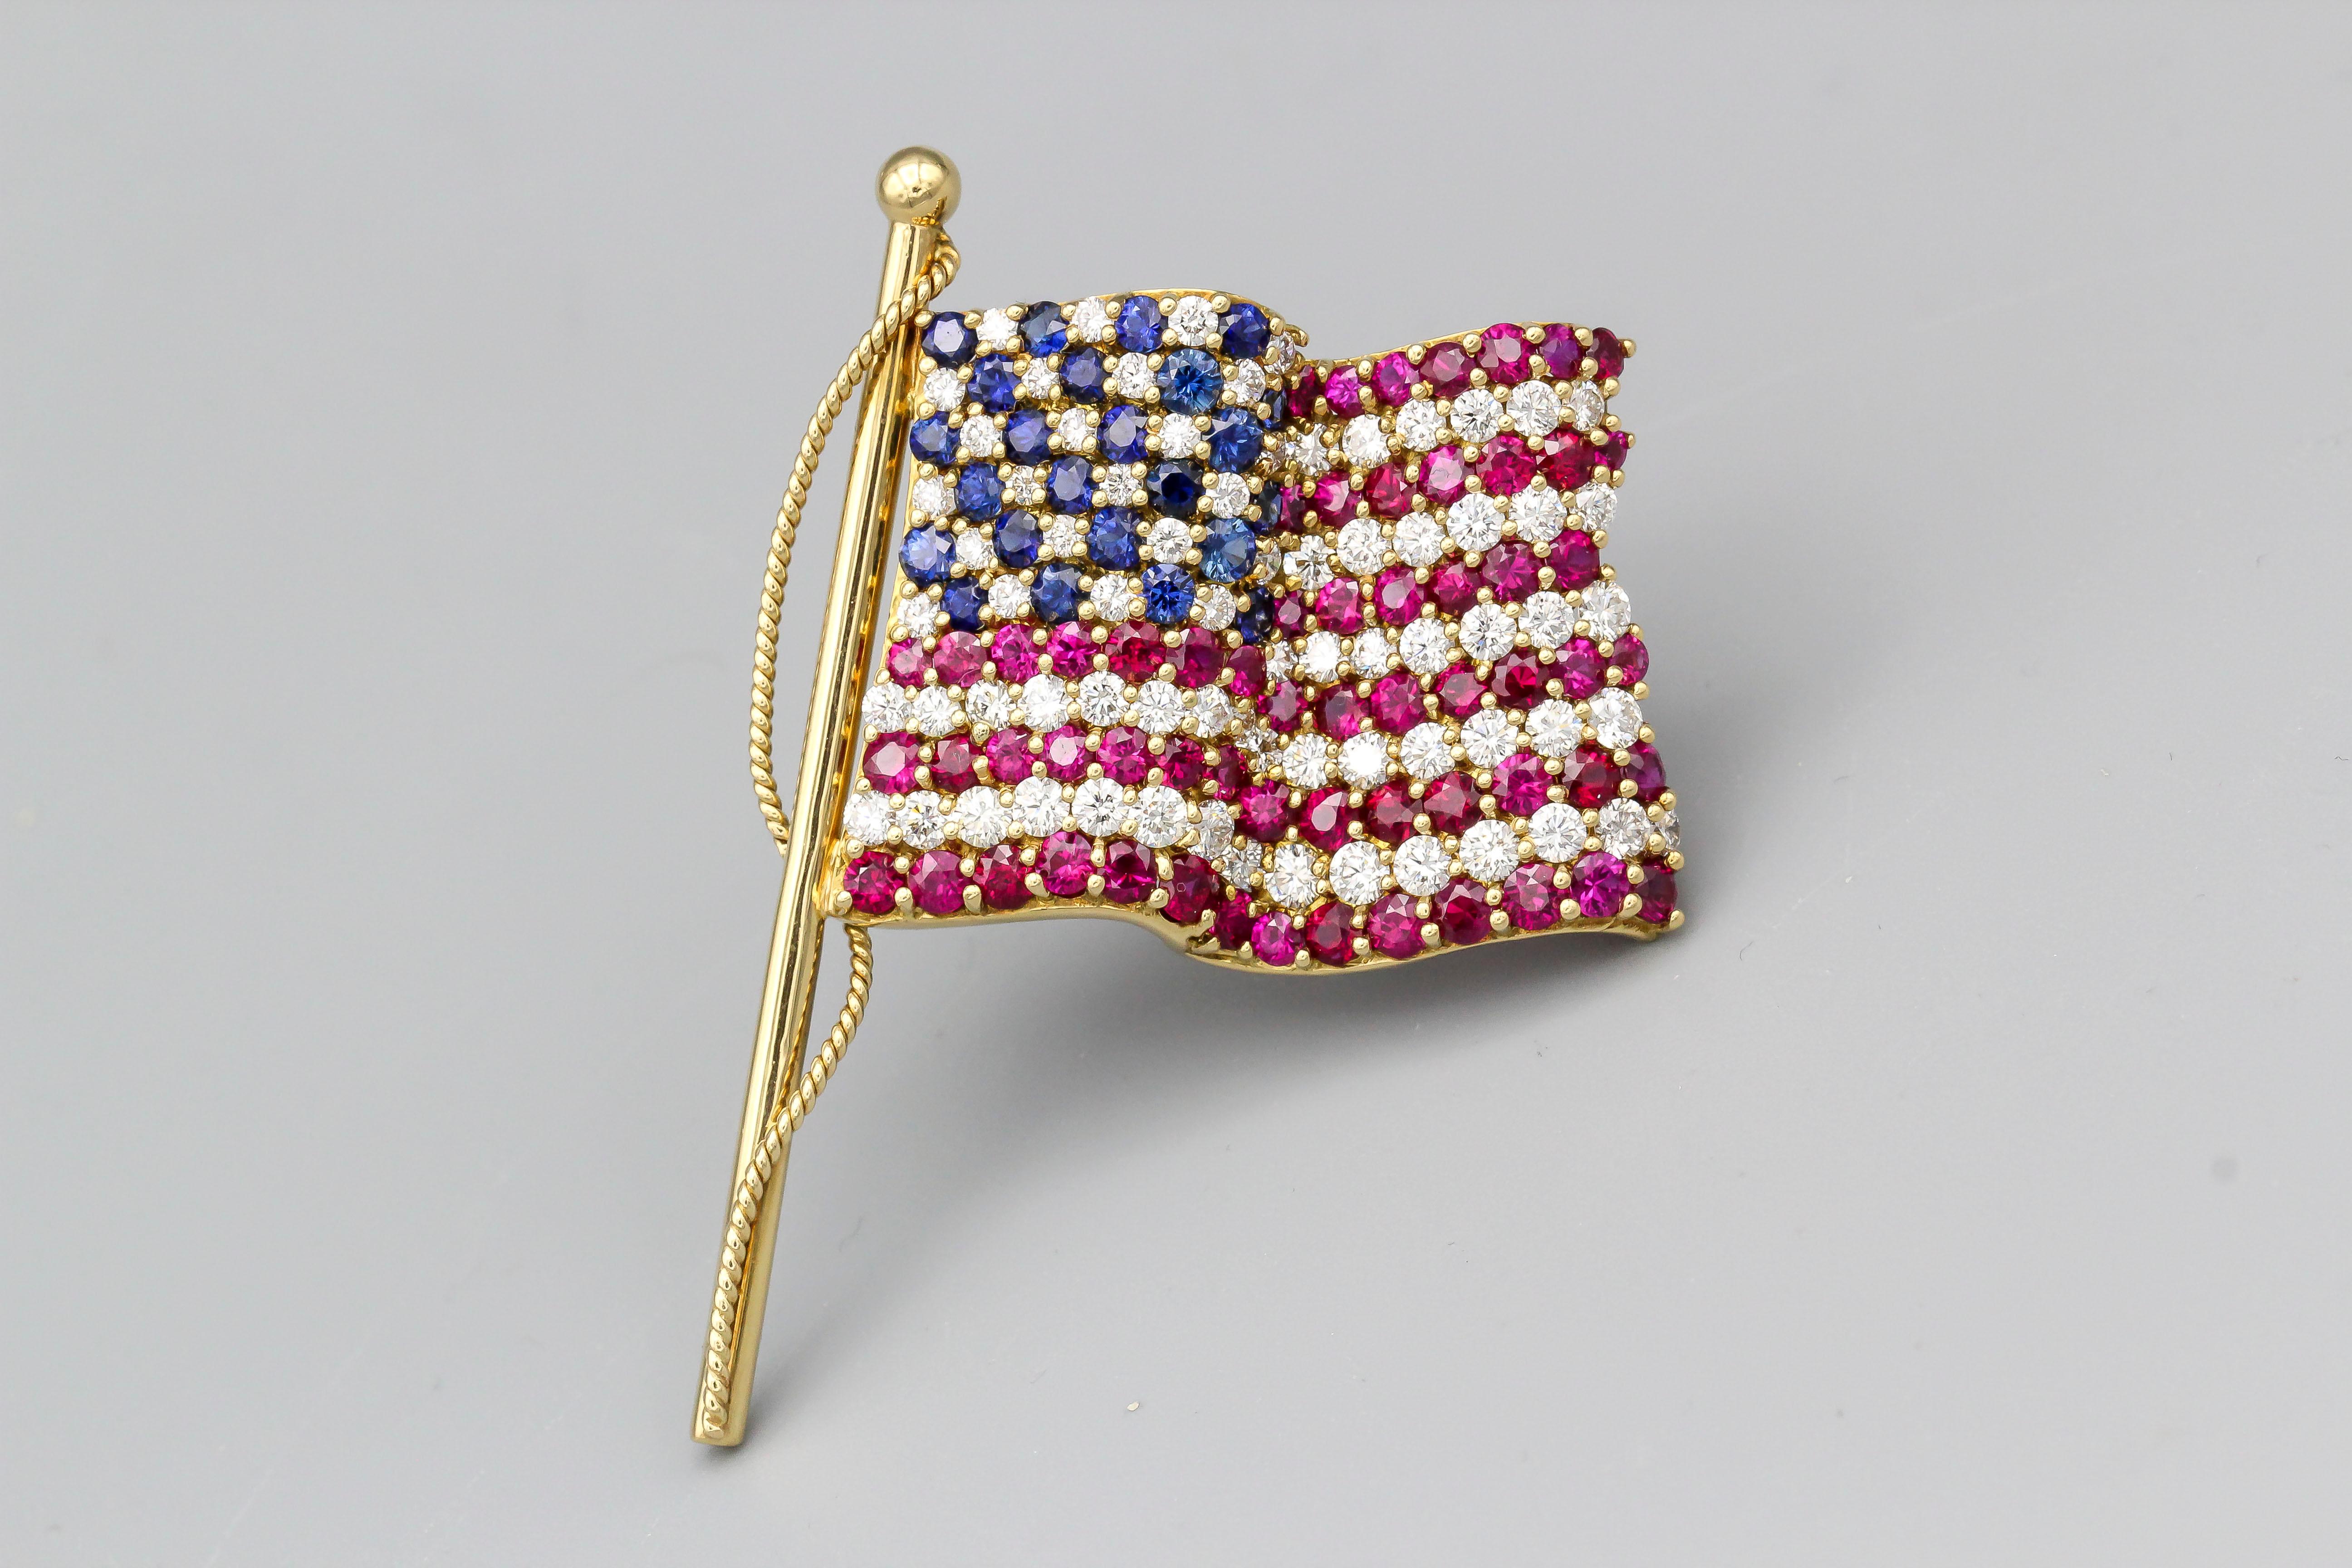 Very fine ruby, sapphire, and diamond brooch set in 18k yellow gold by Tiffany & Co., circa 2001. Featuring vibrant colors and waving flag design. 

Hallmarks: Tiffany & Co., 2001, 750.